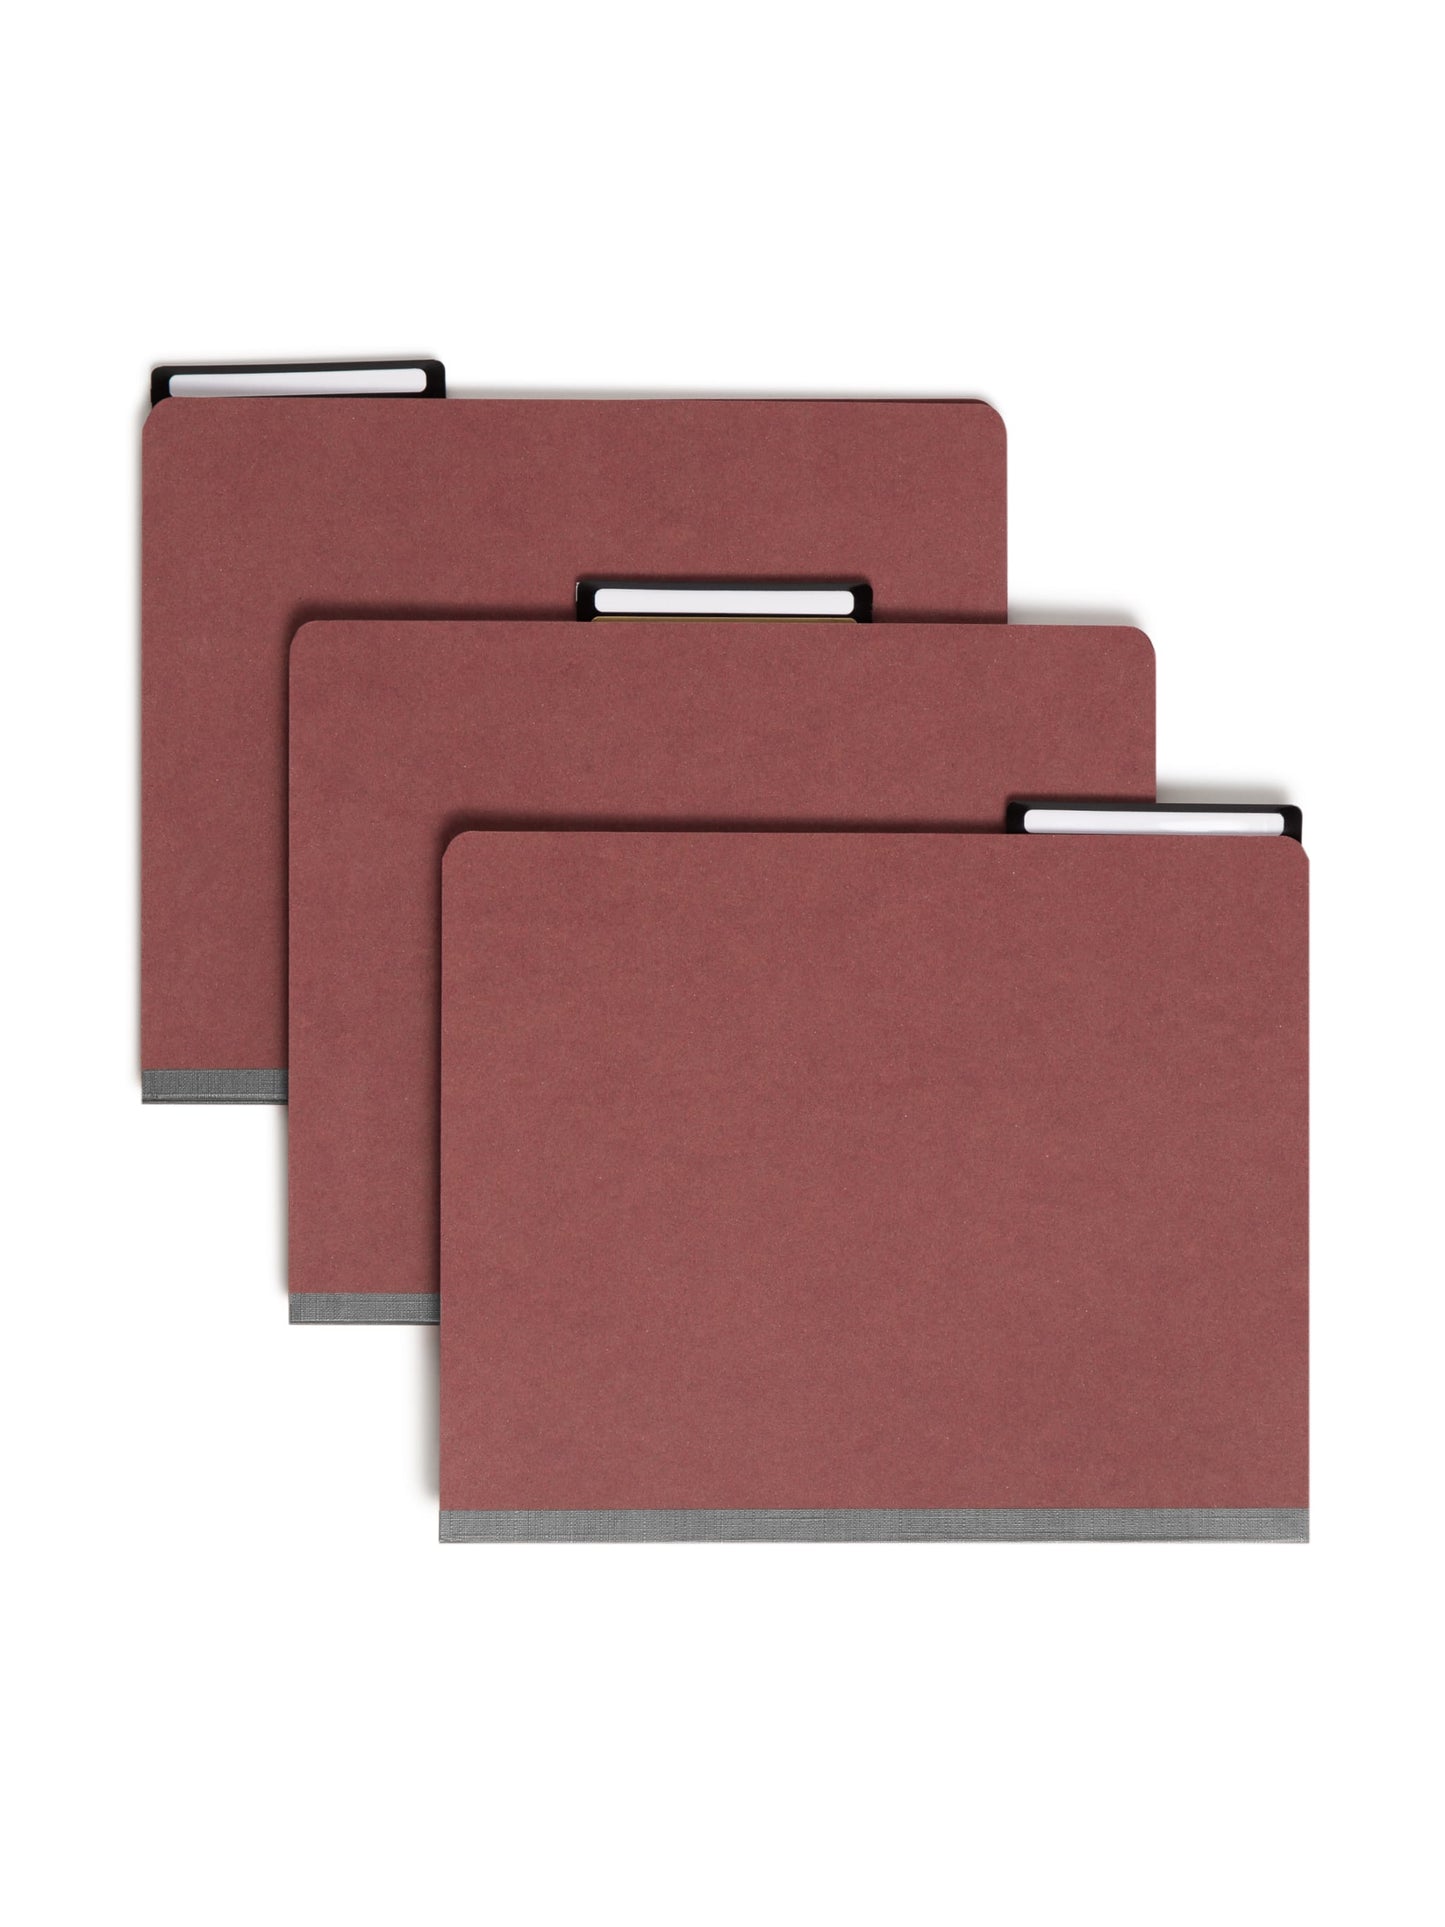 SafeSHIELD® Pressboard Classification File Folders, 2 Dividers, 2 inch Expansion, Metal Tab, Red Color, Letter Size, 